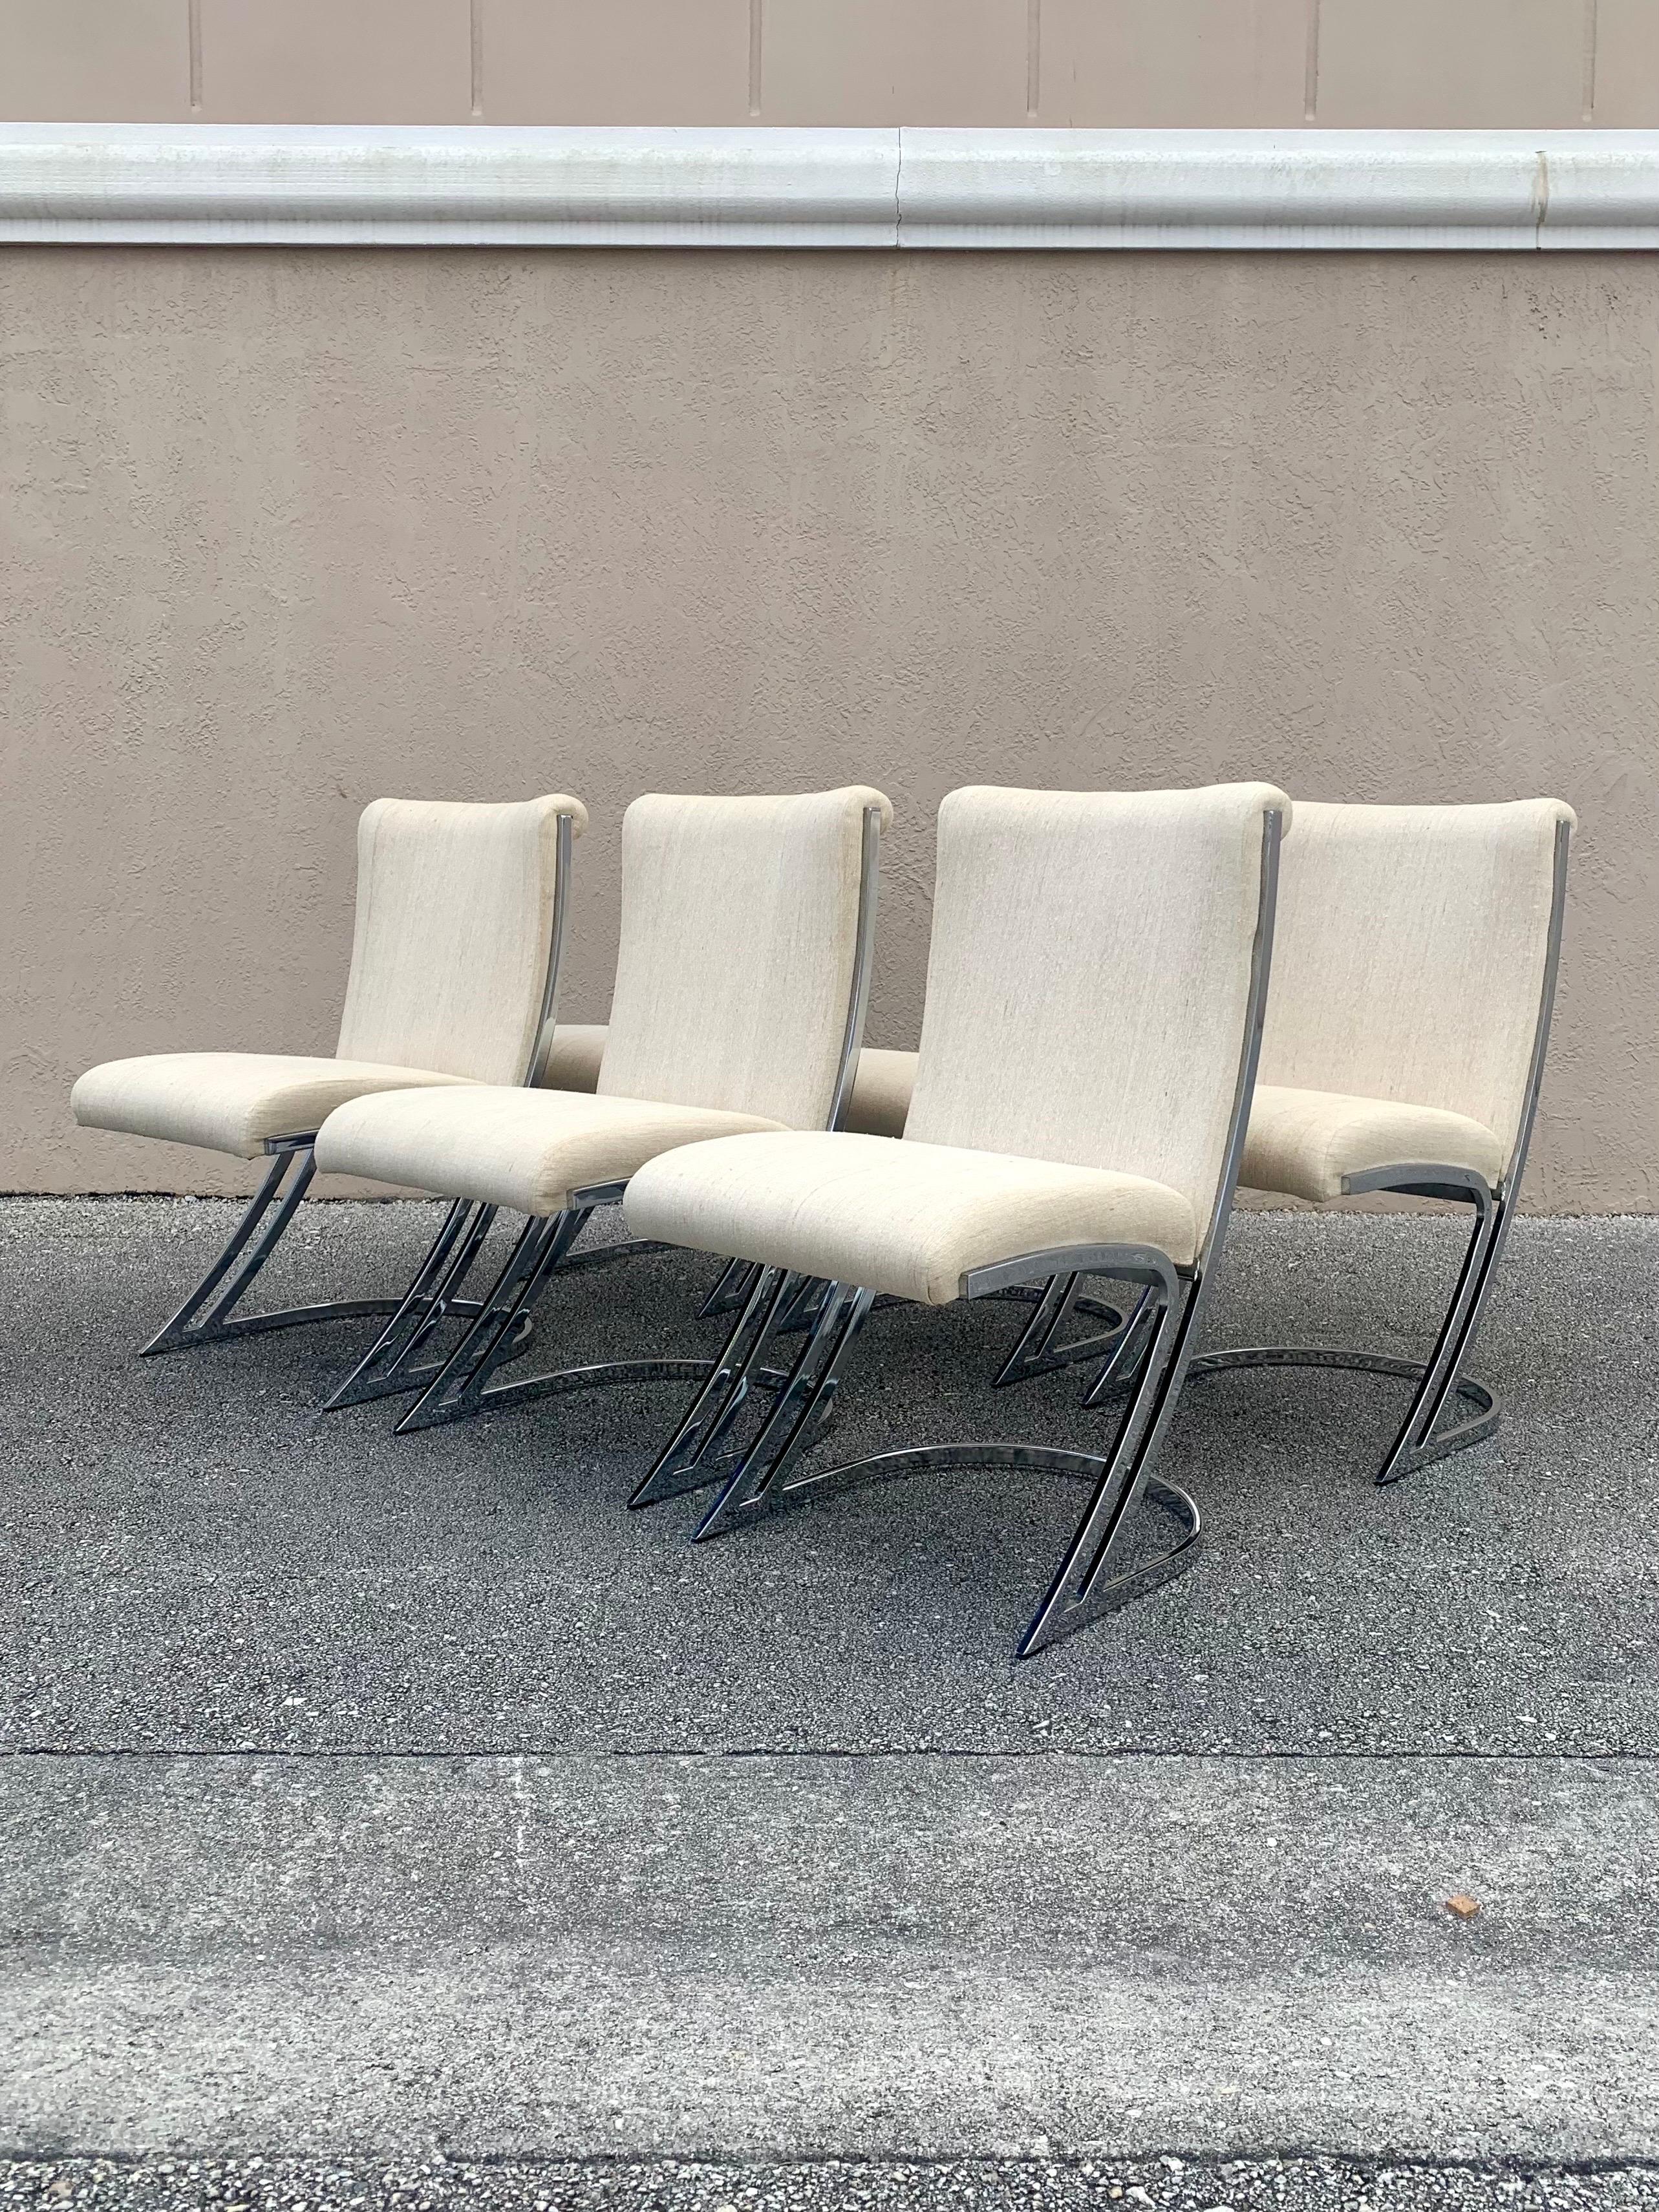 Striking set of six chrome dining chairs designed by Pierre Cardin. Sharp angles mixed with soft flowing curves set a very unique and captivating design from all angles. 

Chrome is in good condition for the most part with two small instances